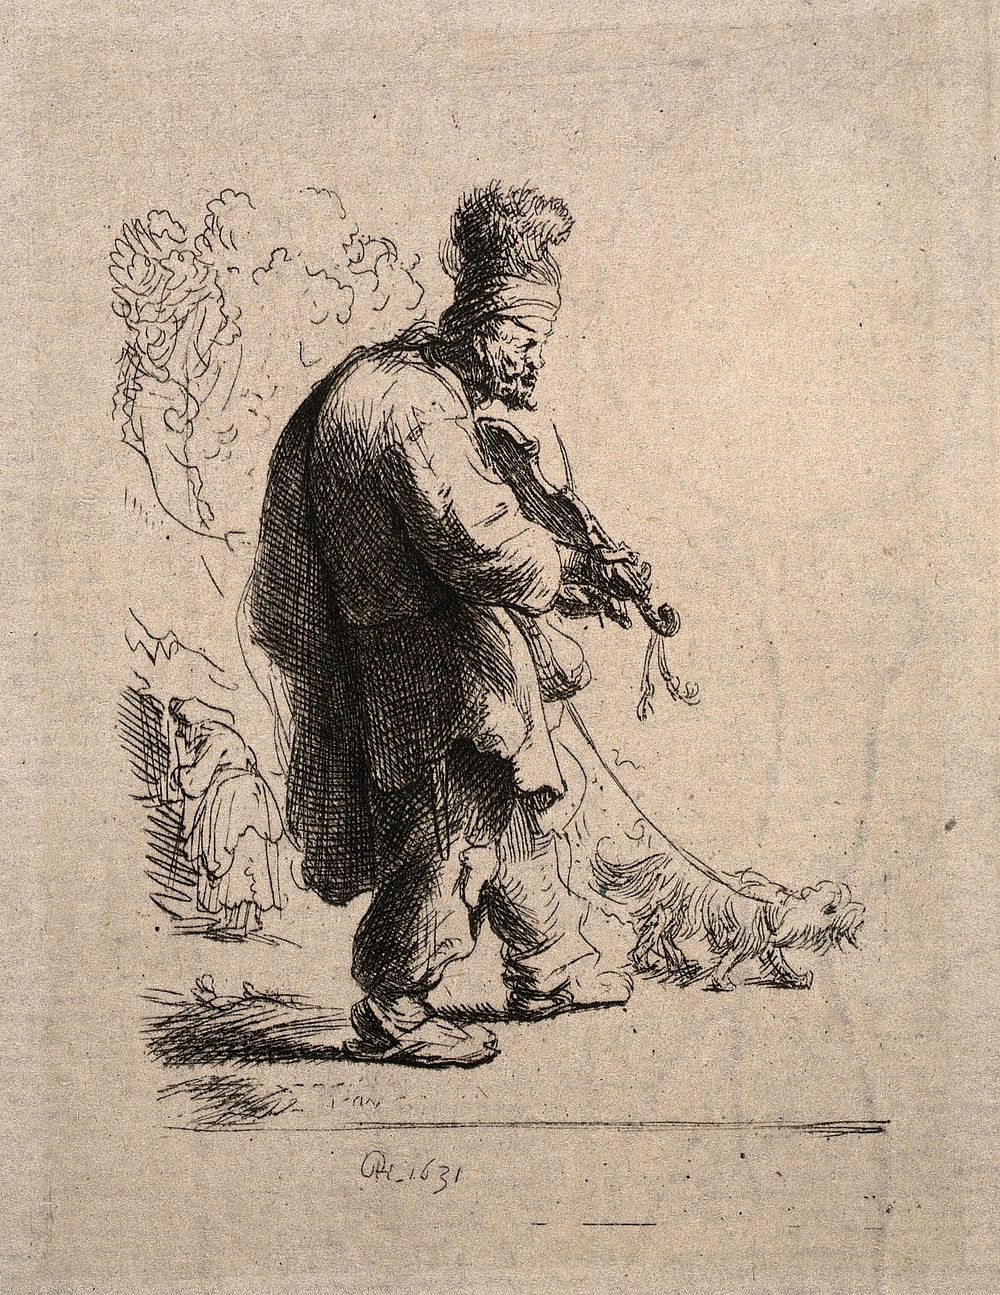 A blind fiddler walks with his dog. Etching by or after Rembrandt, 1631.